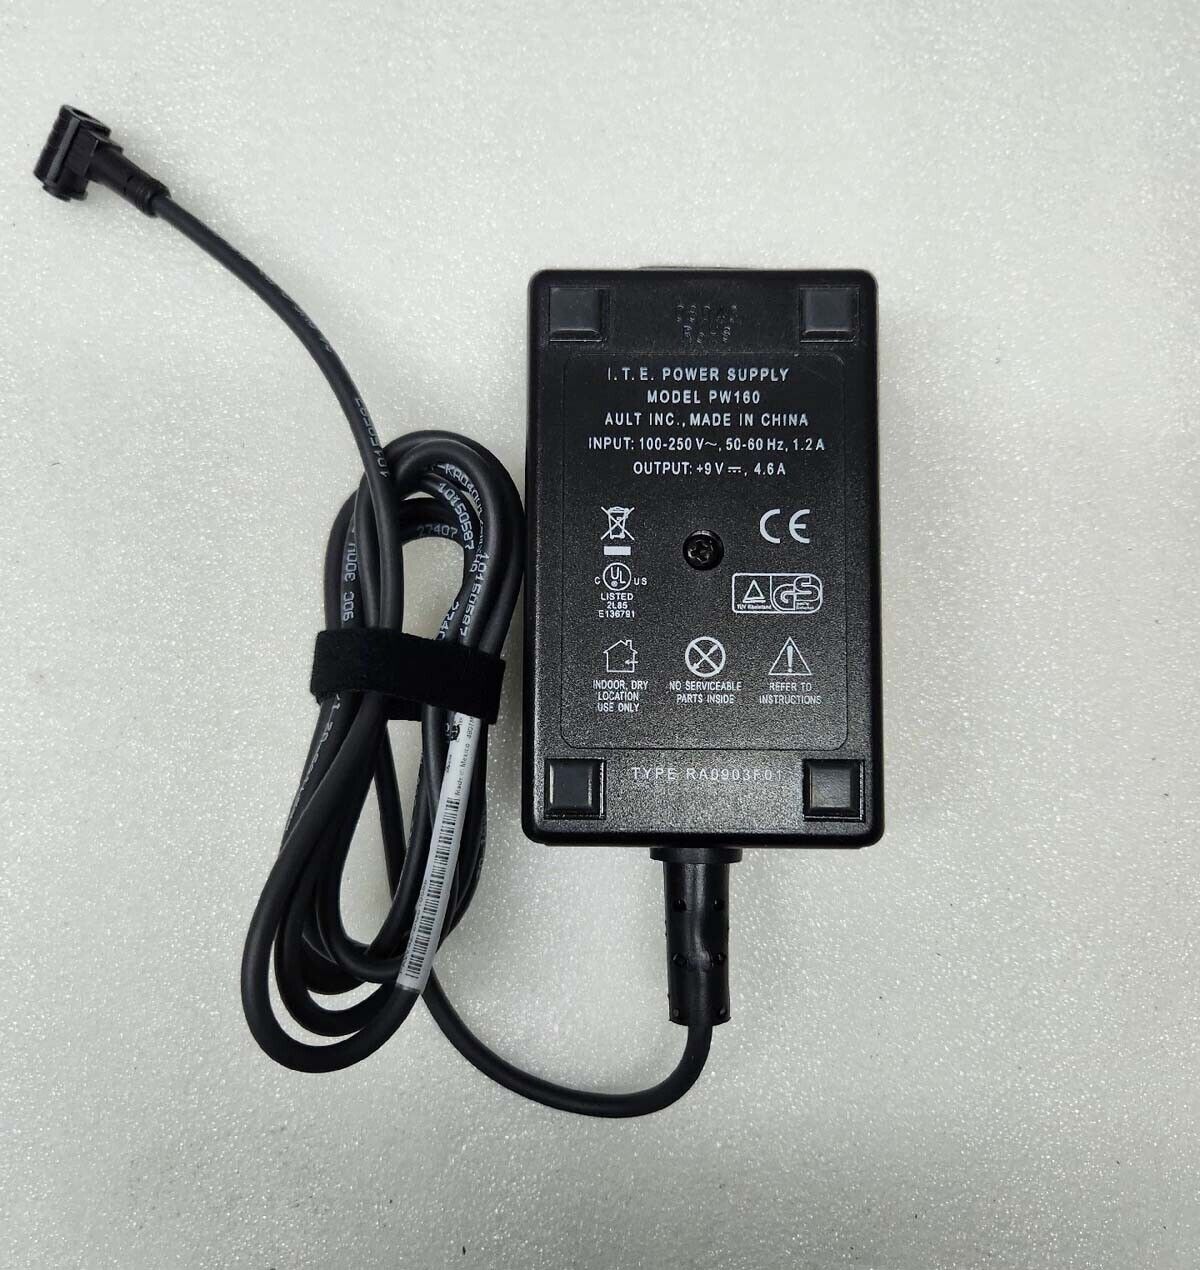 *Brand NEW* Genuine I.T.E AULT 9V 4.6A PW160 AC Adapter ChargerINC. 4-PIN Power Supply